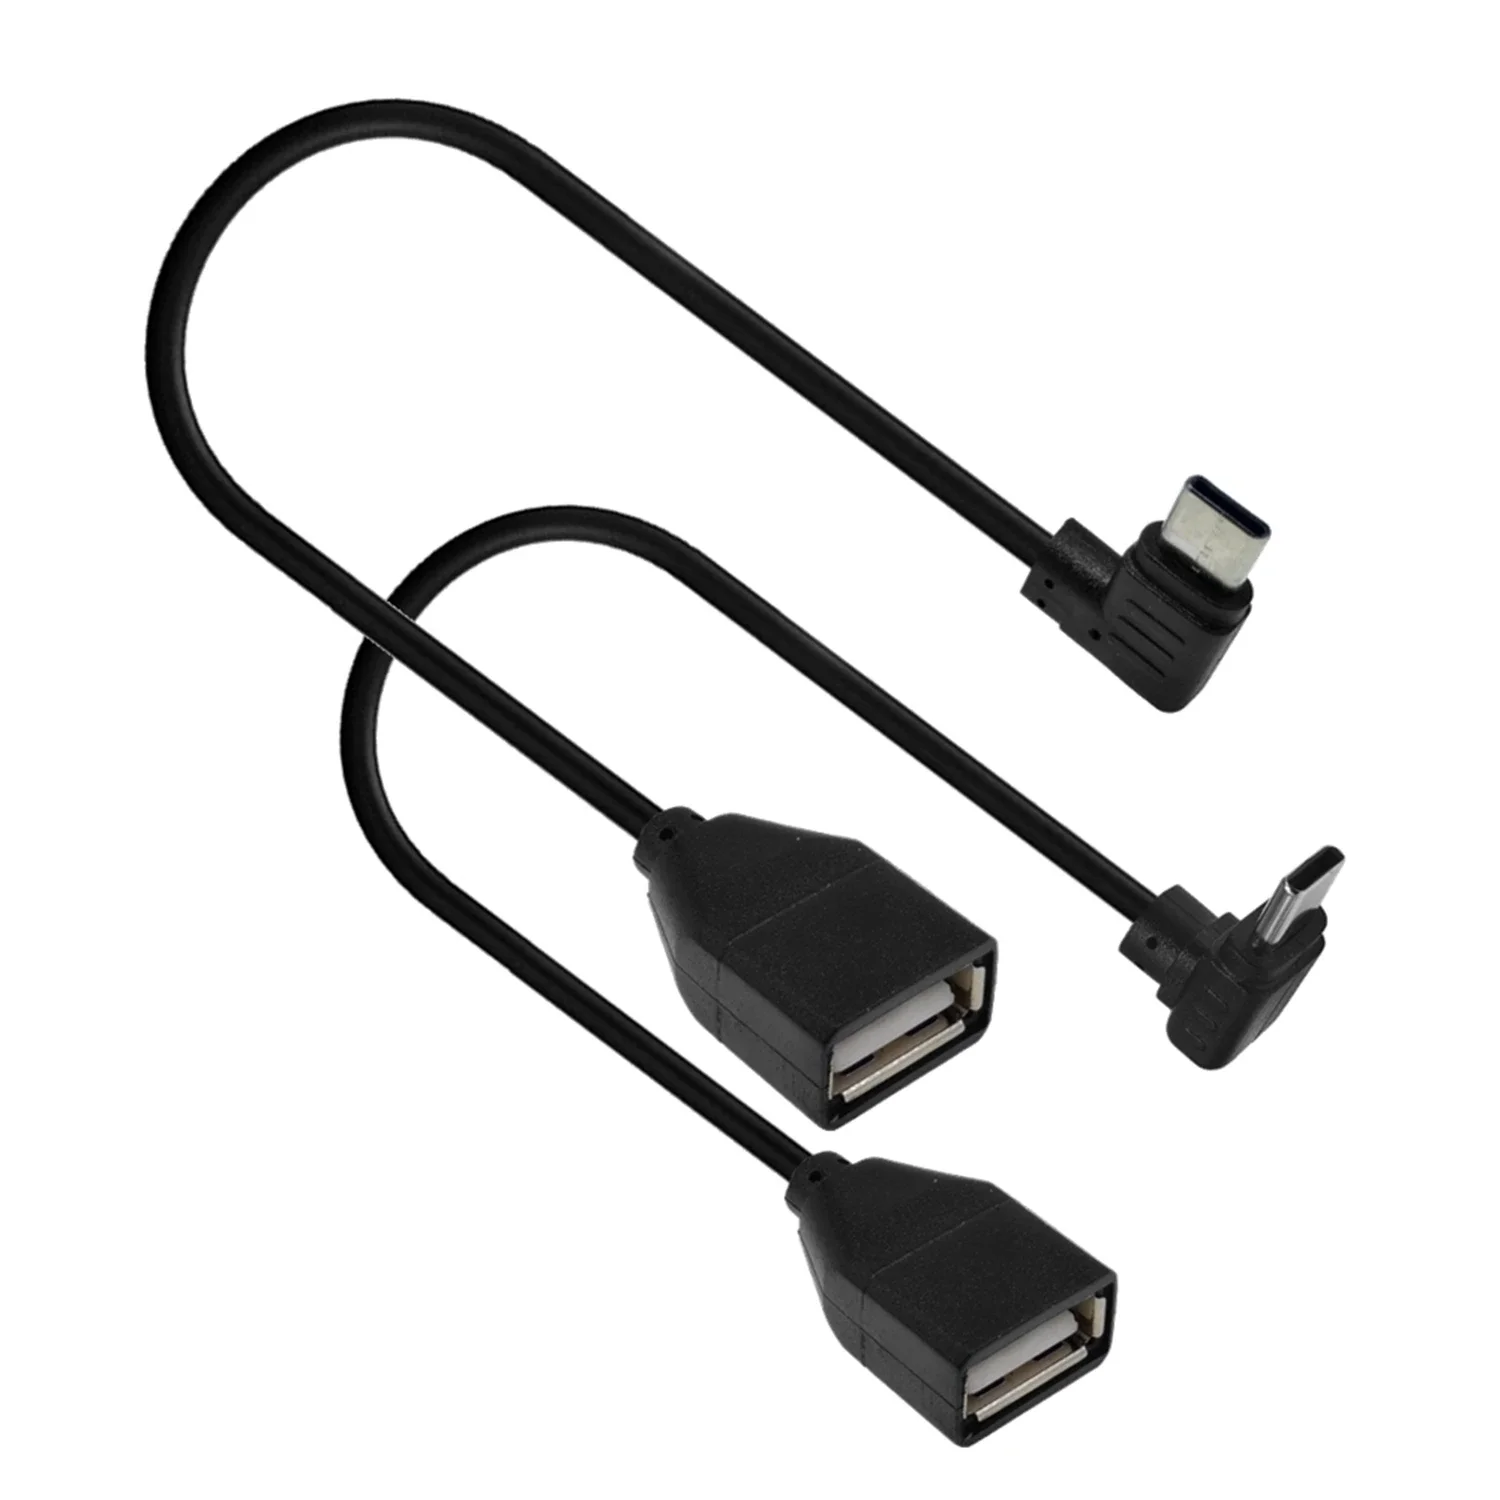 

OTG cable adapter suitable for Android phones, universal TYPE-C USB, compact, Android phone connection 25CM